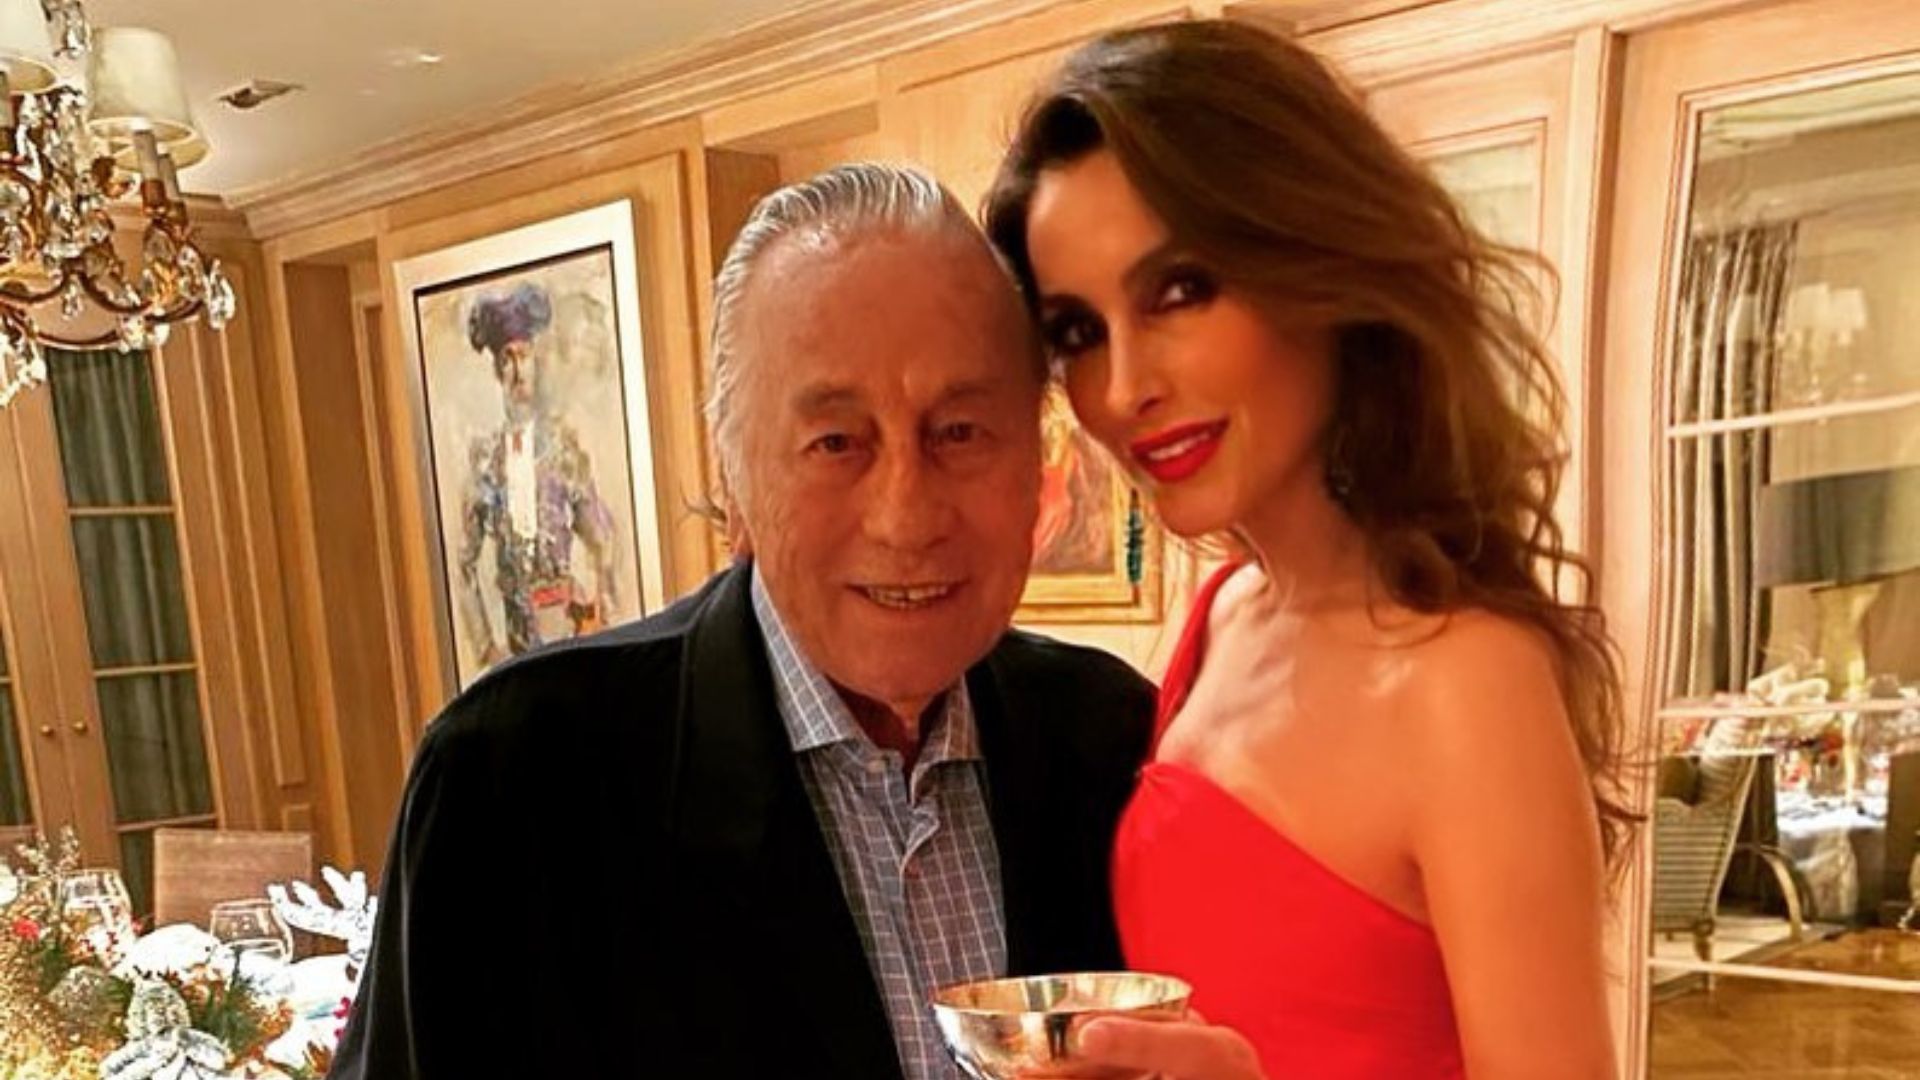 Paloma Cuevas has a close relationship with her father Victoriano Valencia who already accepts Luis Miguel (Instagram @palomacuevasofficial)